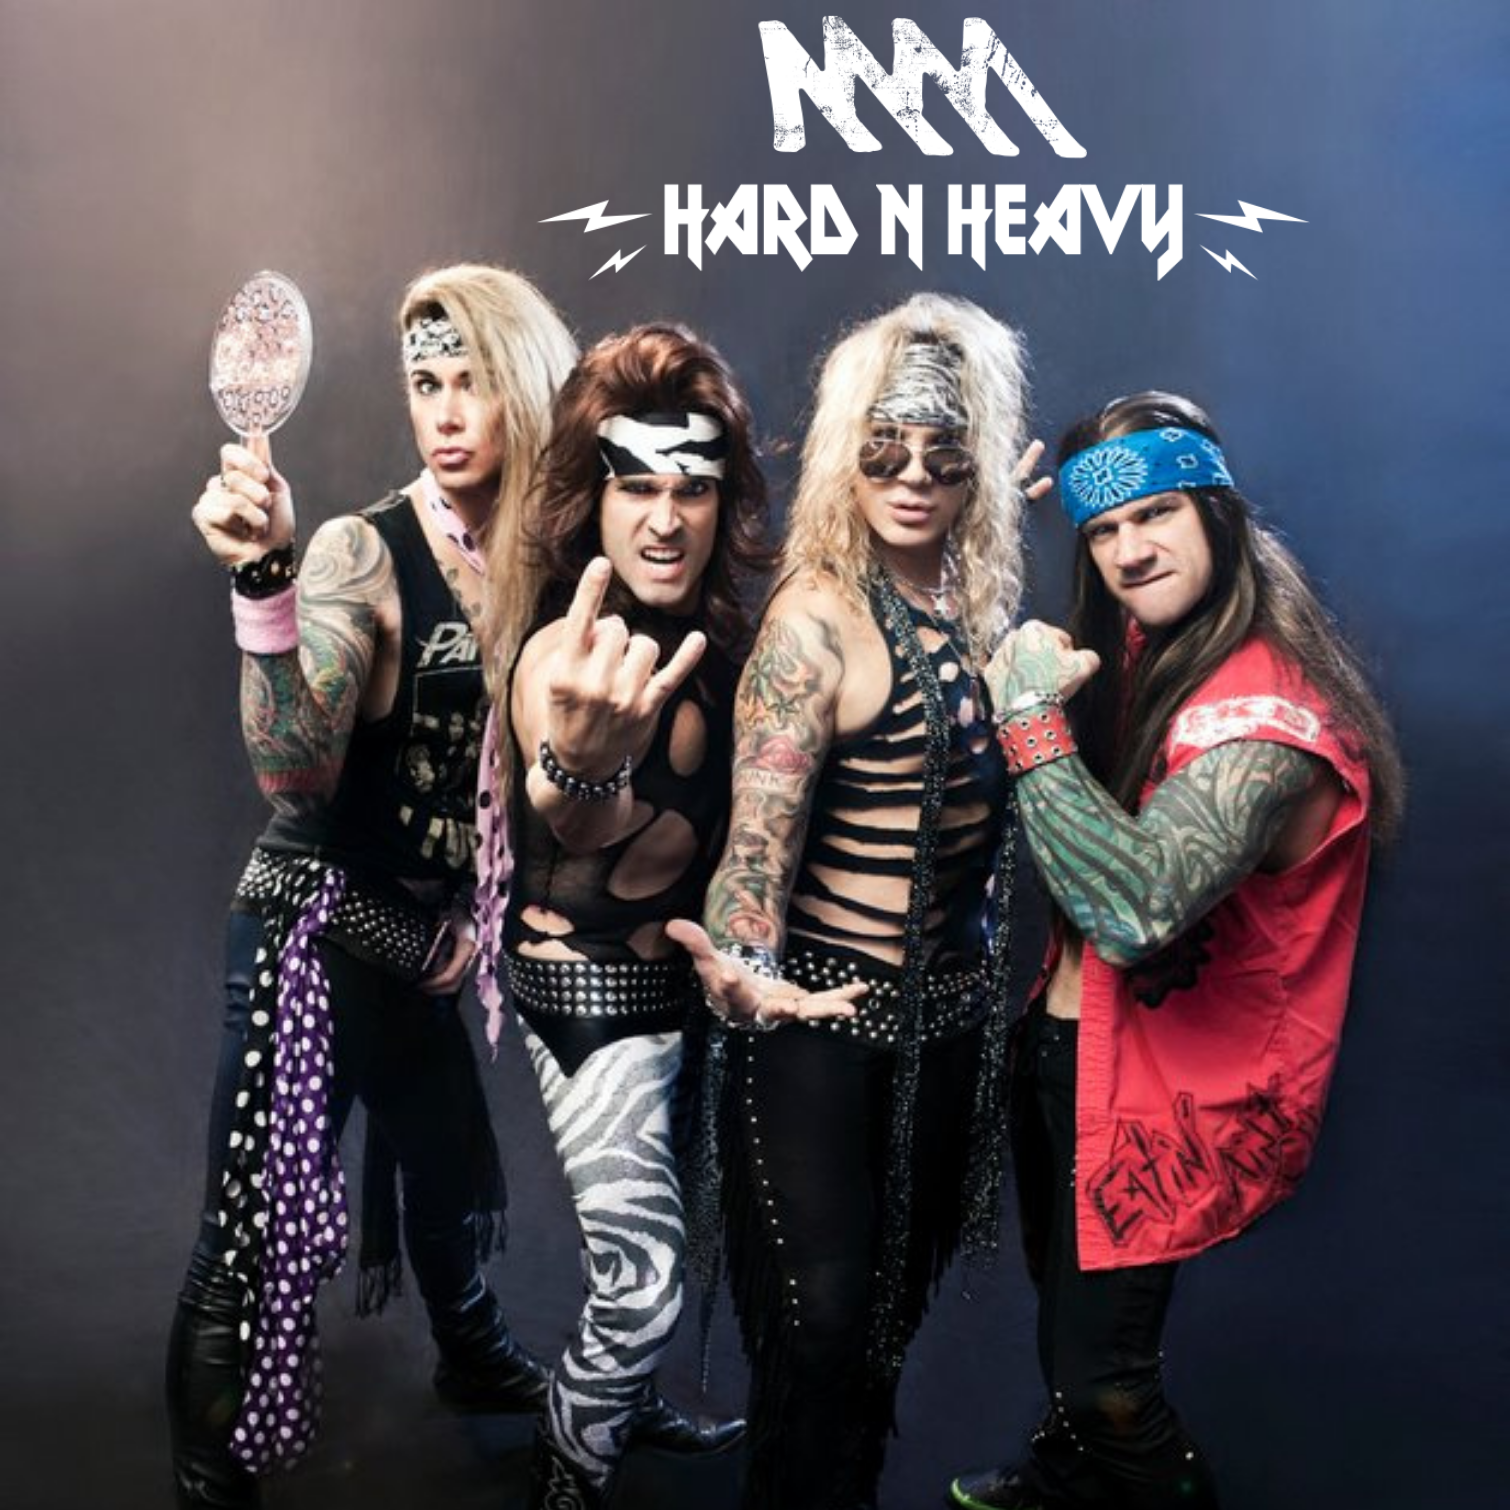 Steel Panther & Sevendust rescheduled Aus tour dates revealed; there's already two br00tal new metal bands called "COVID-19" & more MMM Hard N Heavy headlines with Emmy Mack